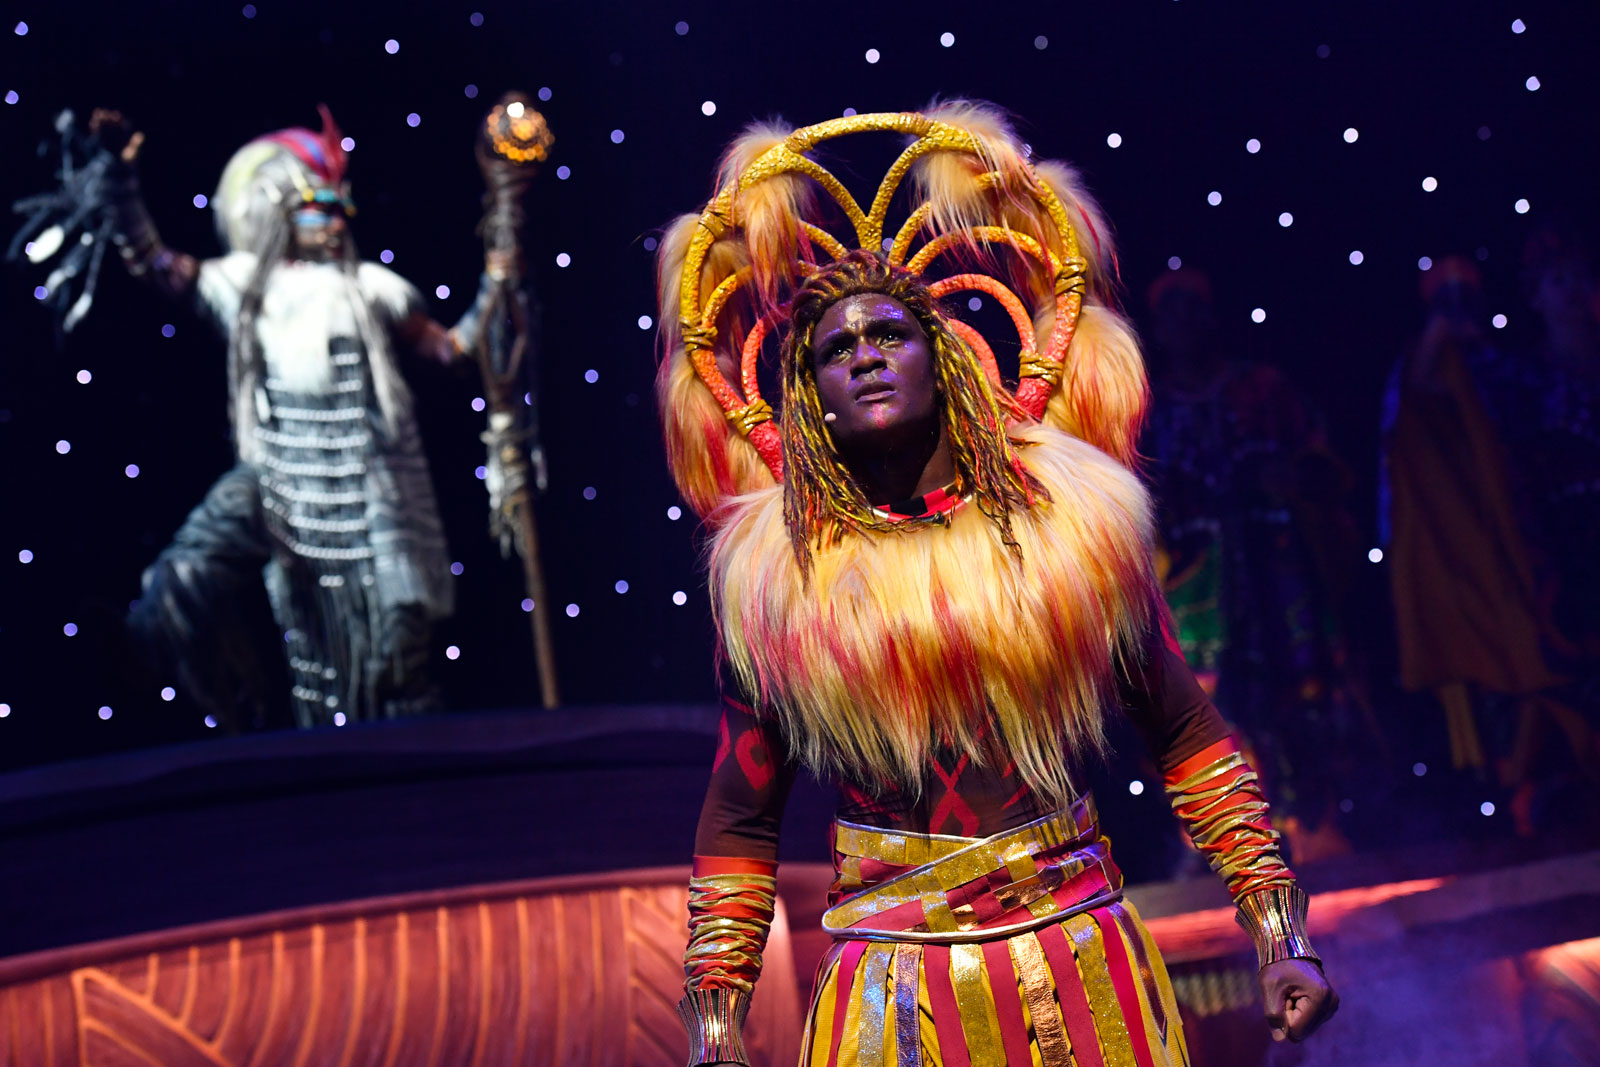 The spectacular Lion King: Rhythms of the Pride Lands show